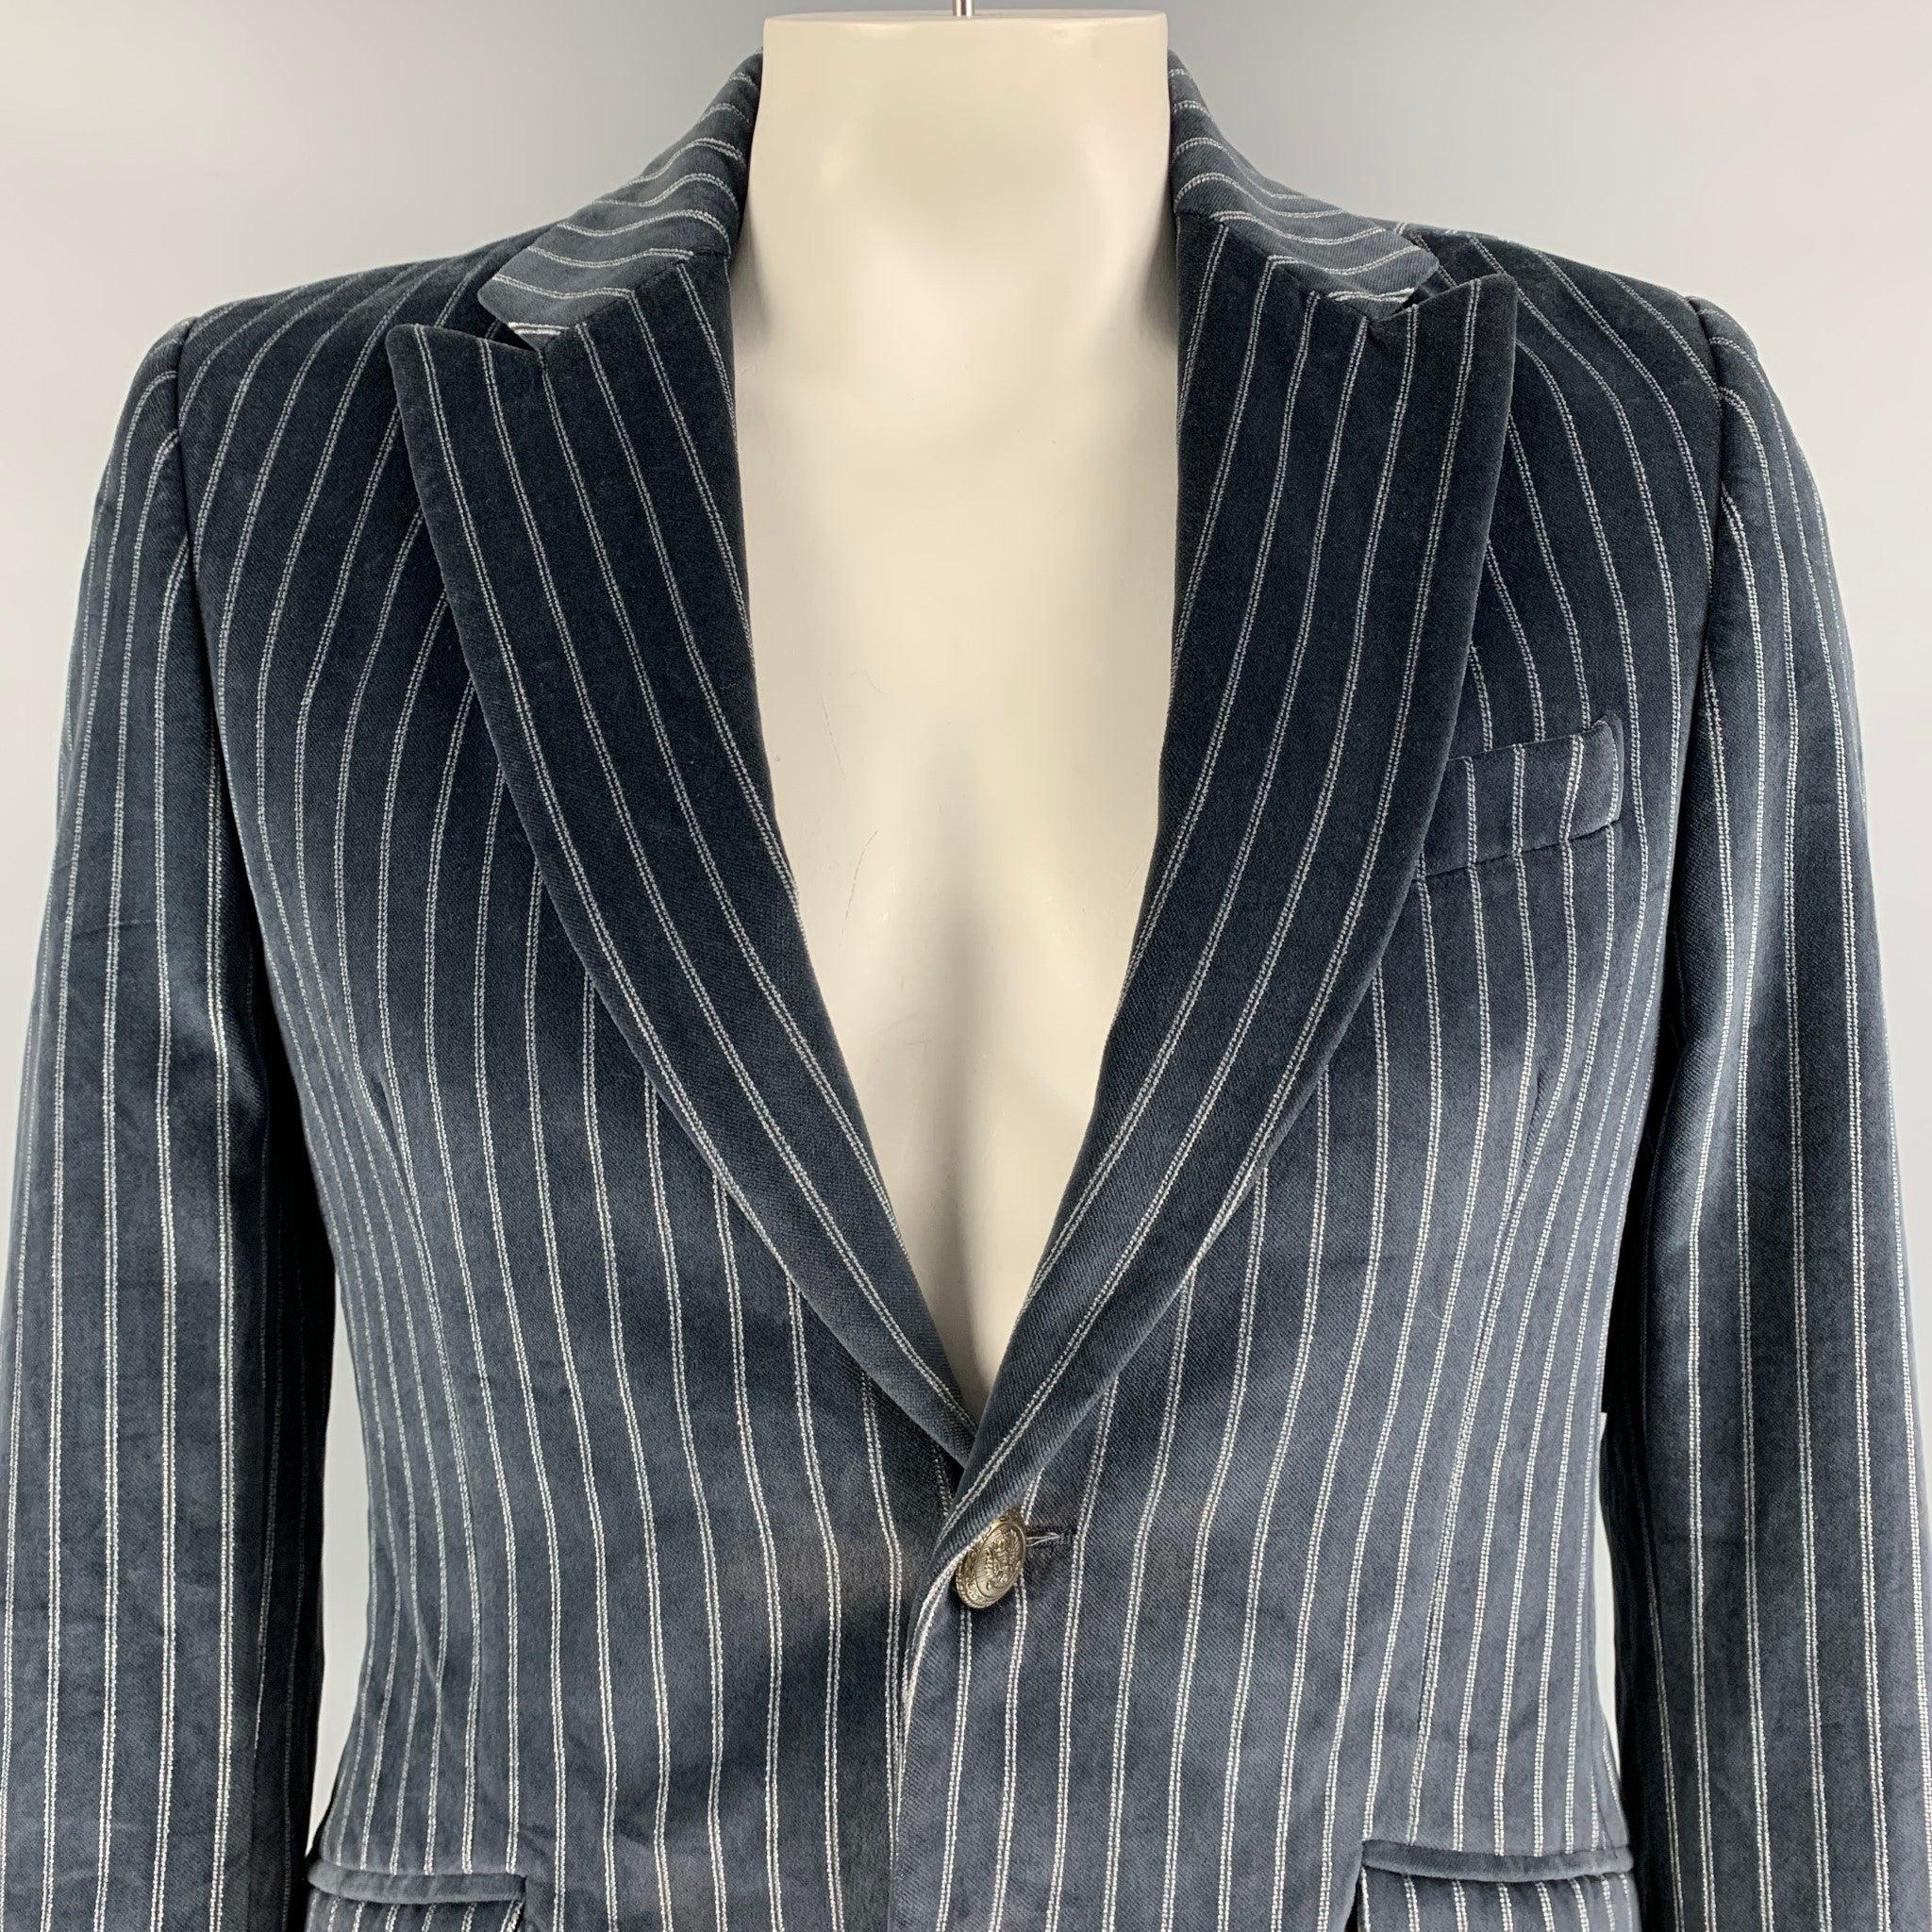 D&G by DOLCE & GABBANA long sleeve sport coat comes in grey velvet striped print features a two button closure, straight with flap pockets and notch lapel. Made in Italy. Excellent Pre-Owned Condition. 

Marked:   50 IT 

Measurements: 
 
Shoulder: